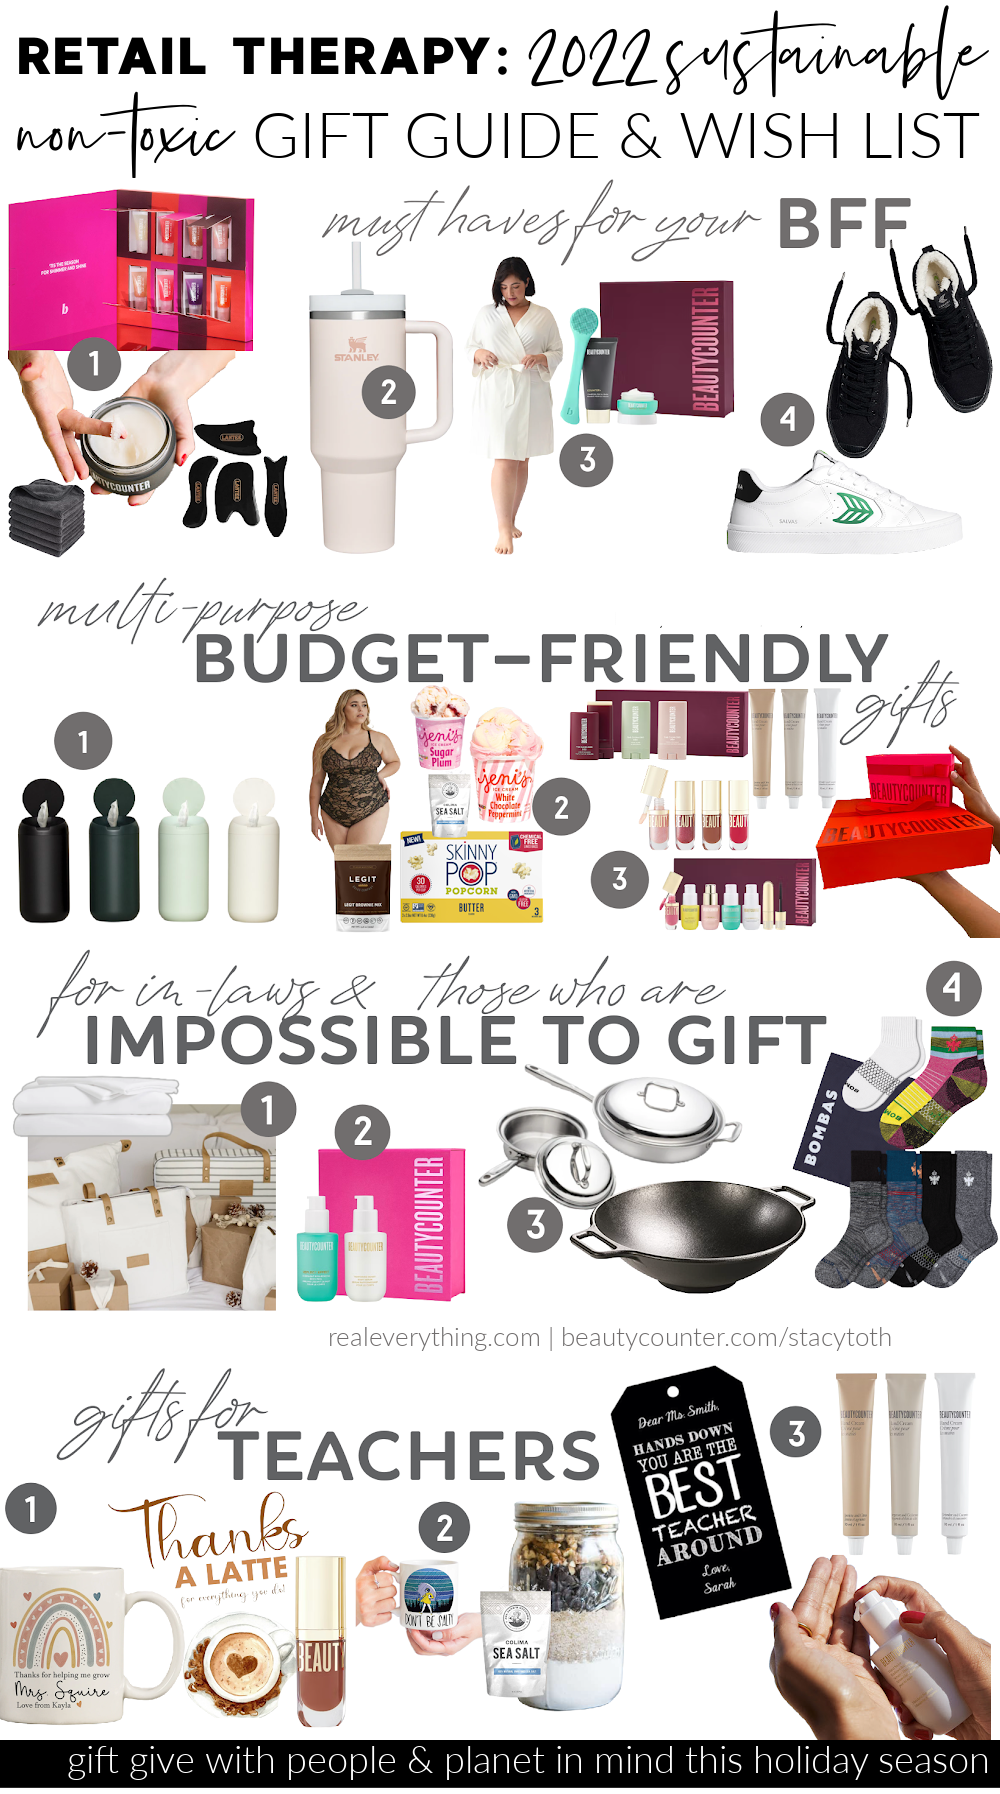 https://realeverything.com/wp-content/uploads/Retail-Therapy-2022-Sustainable-Gift-Guide-RealEverything-Stacy-Toth-Pin.png